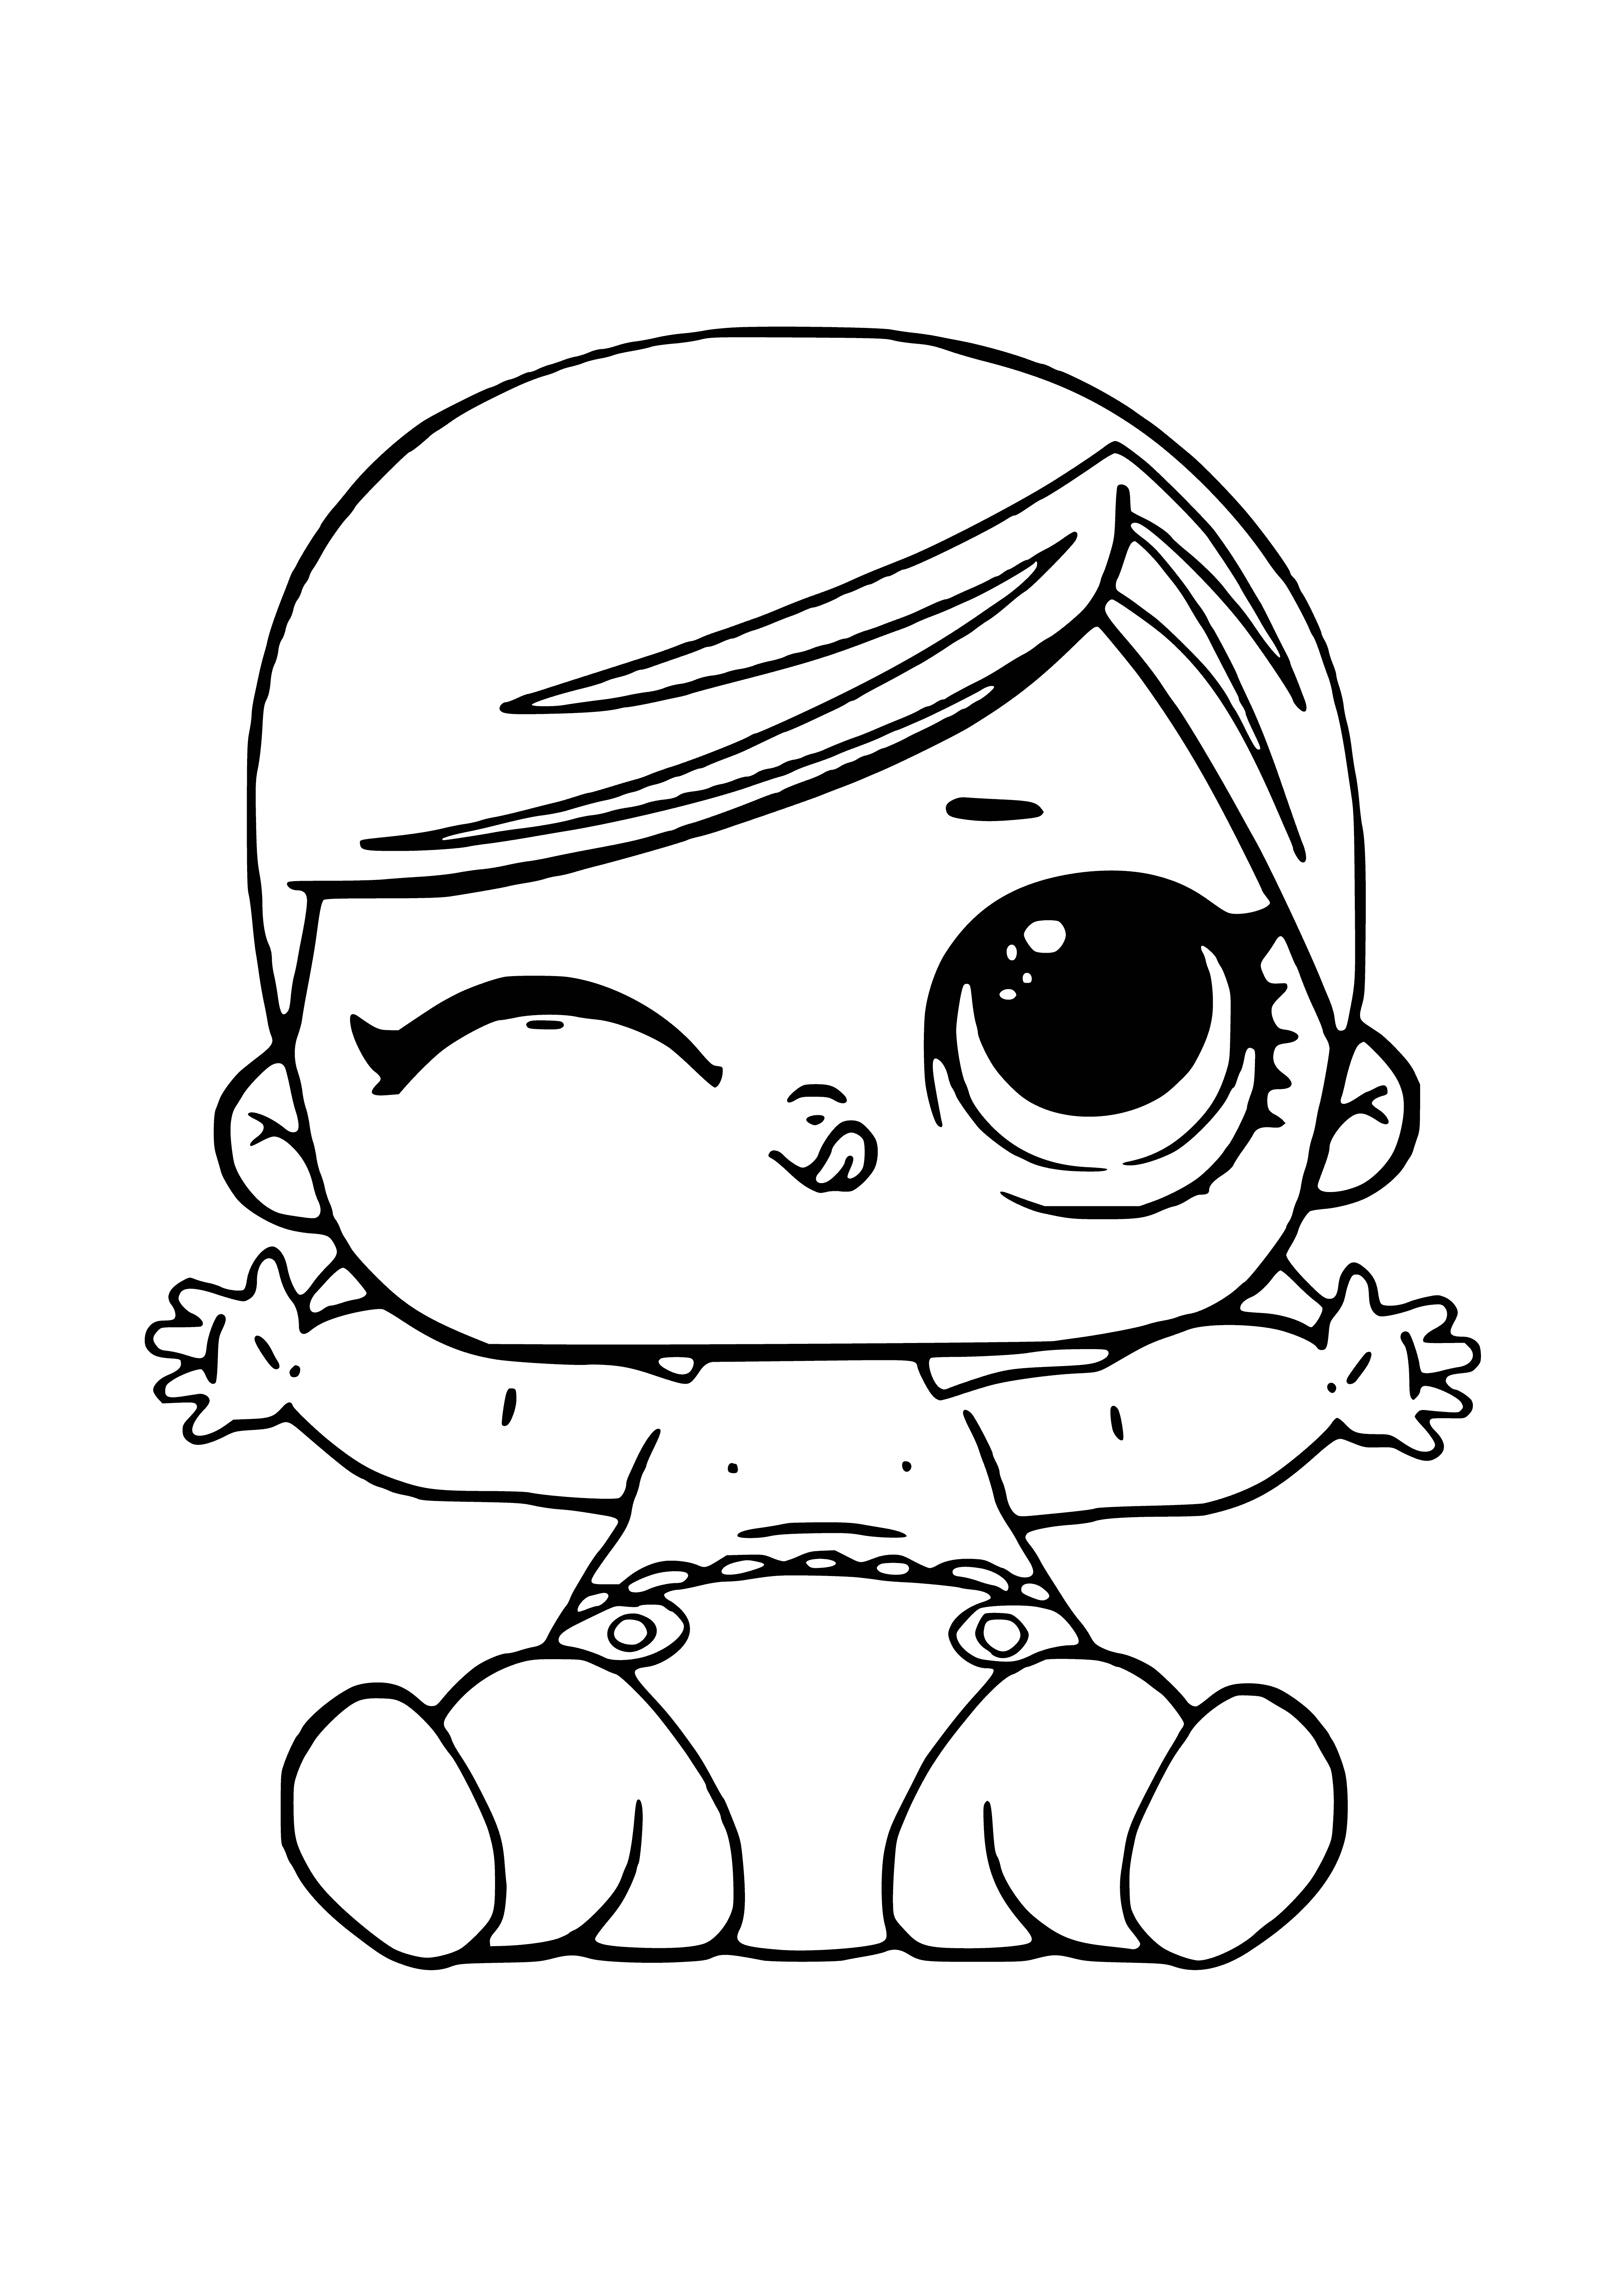 coloring page: Babies can color a fun toy orchestra with a xylophone, glockenspiel, drums, tambourine and cymbal around a blue baby with a mallet and tambourine.